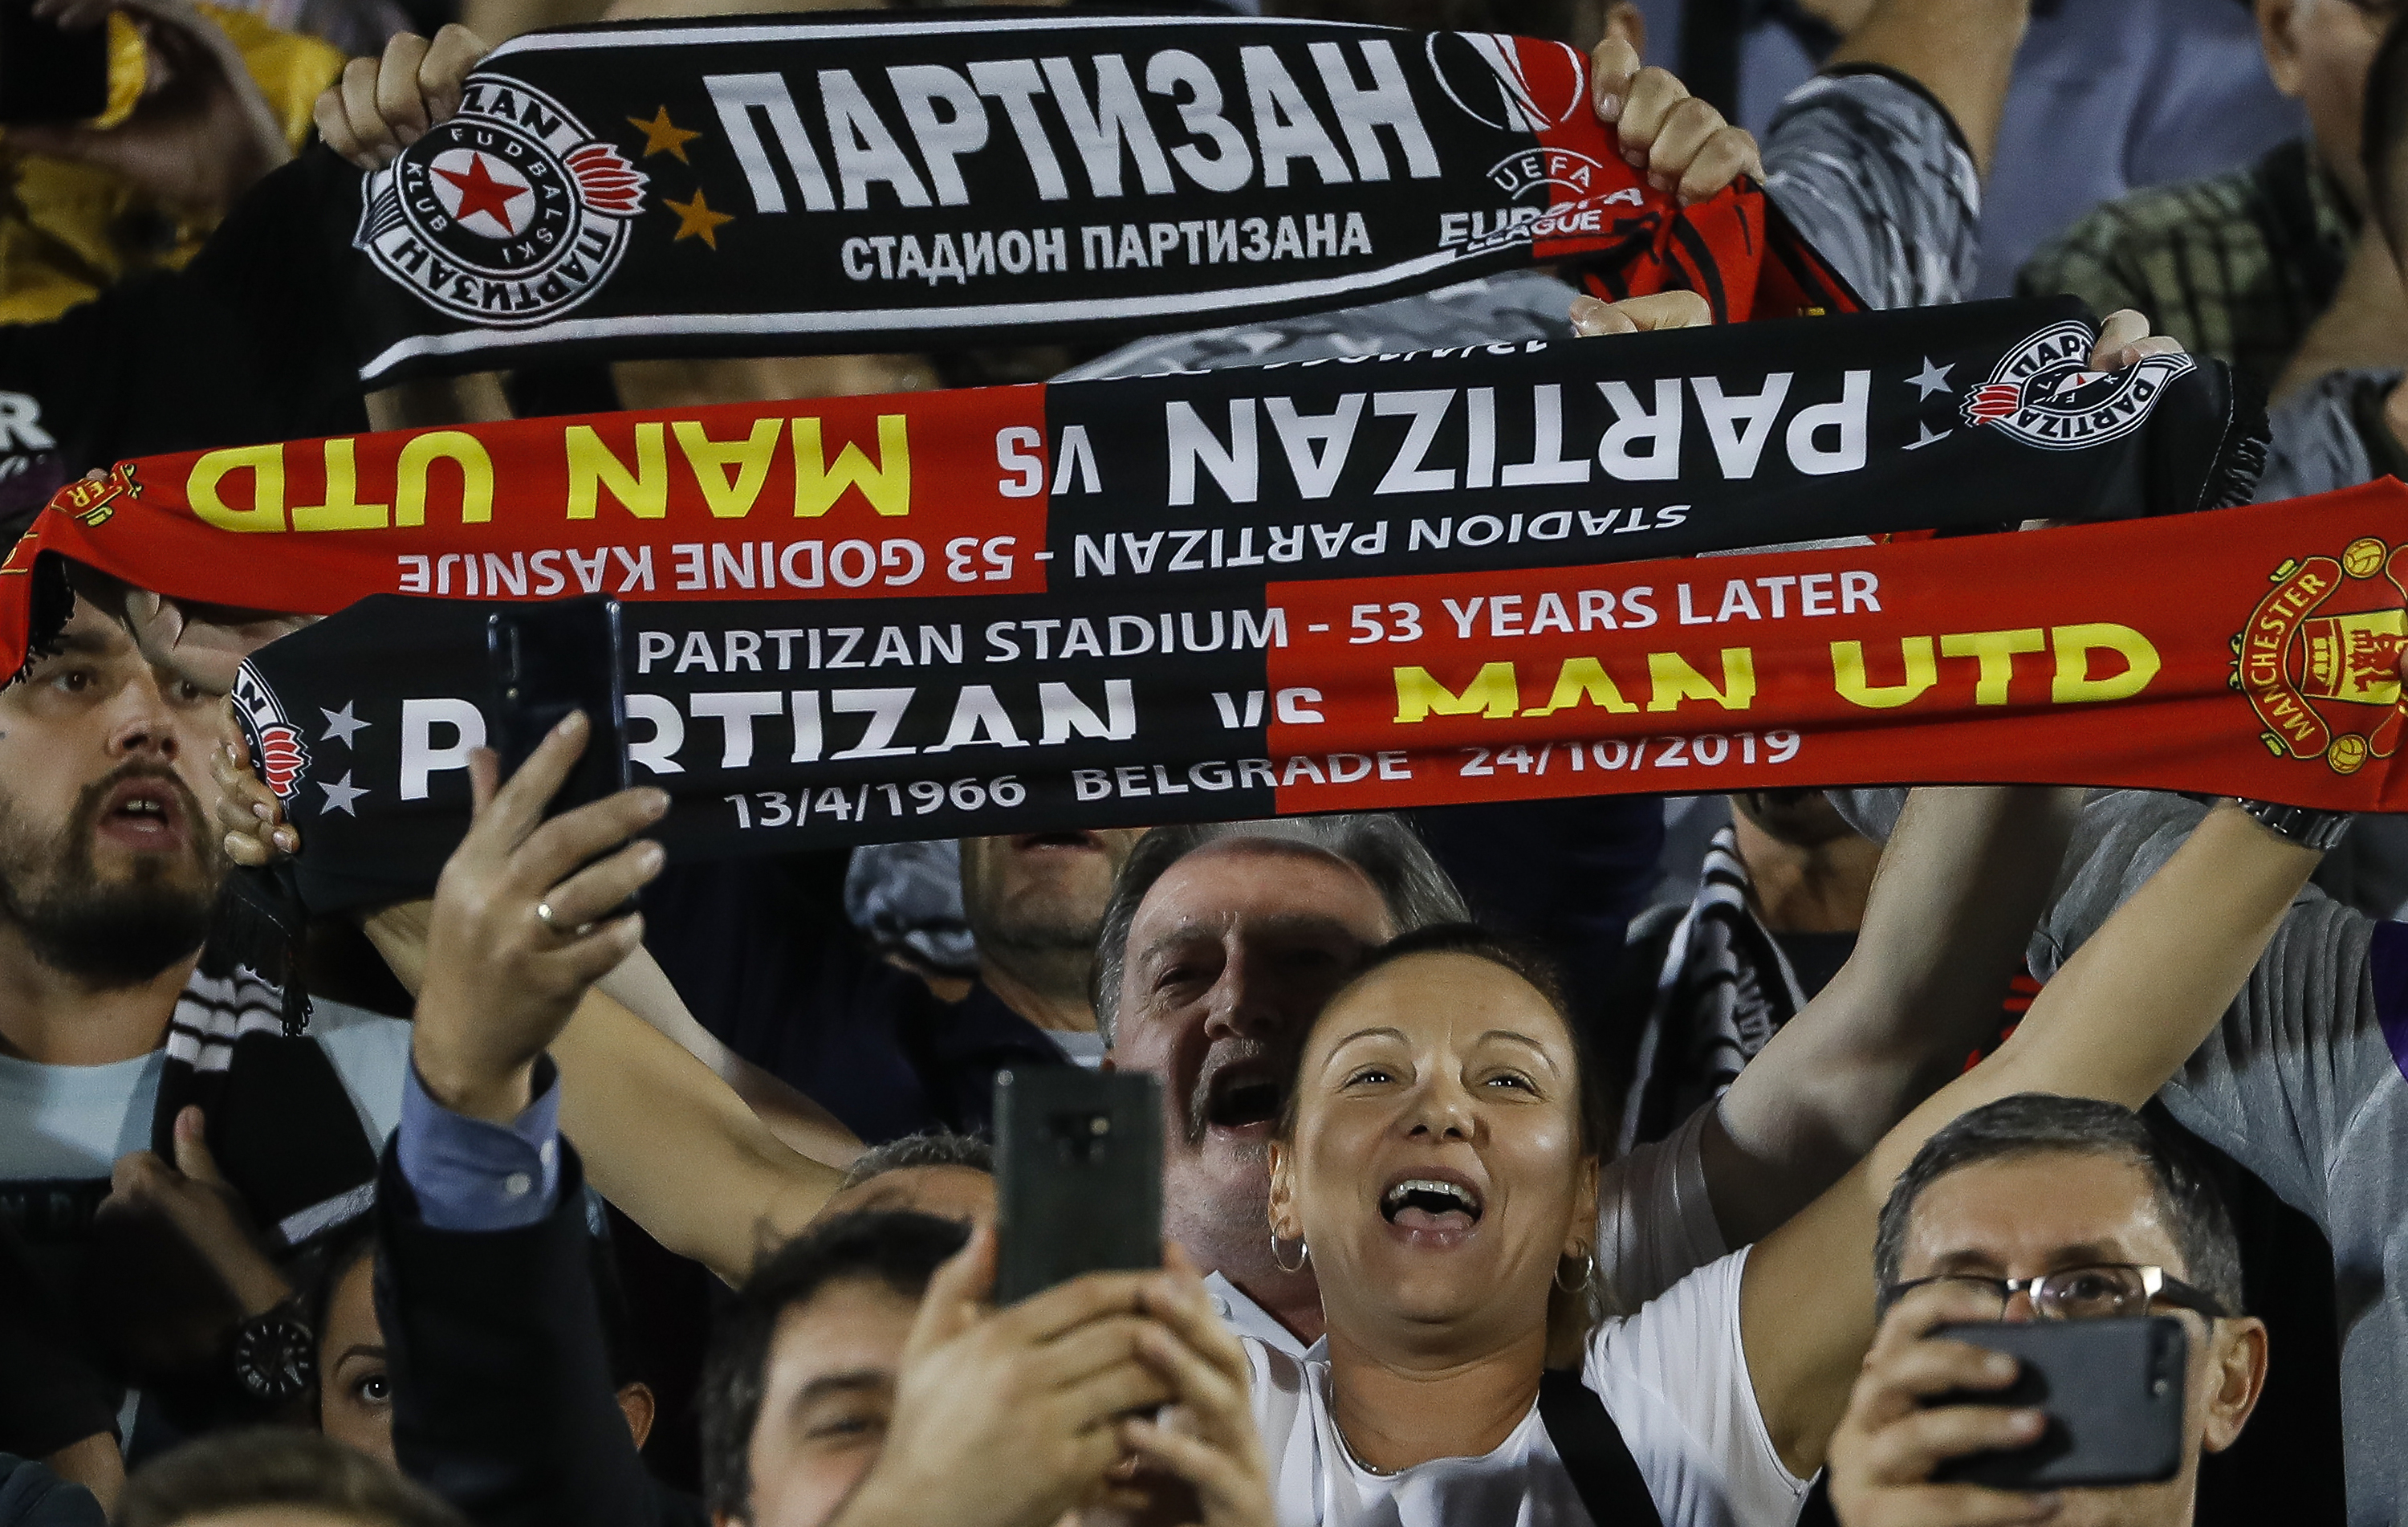 BELGRADE, SERBIA - OCTOBER 24: FK Partizan fans give their support prior the UEFA Europa League group L match between Partizan and Manchester United at Partizan Stadium on October 24, 2019 in Belgrade, Serbia. (Photo by Srdjan Stevanovic/Getty Images)